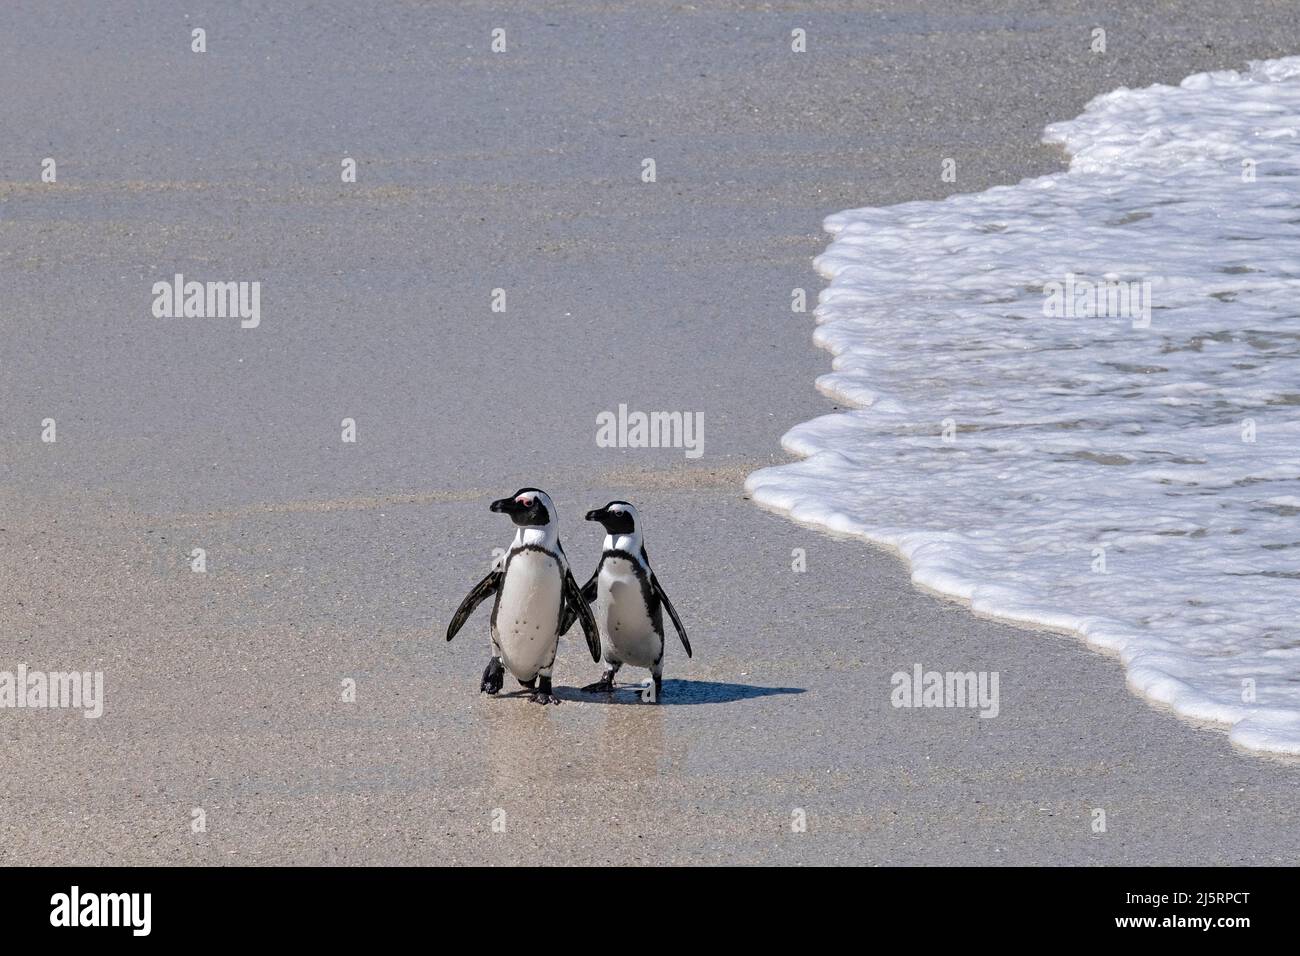 Two Cape penguins / South African penguin (Spheniscus demersus) at Boulders Beach, Simon's Town, Western Cape, South Africa Stock Photo